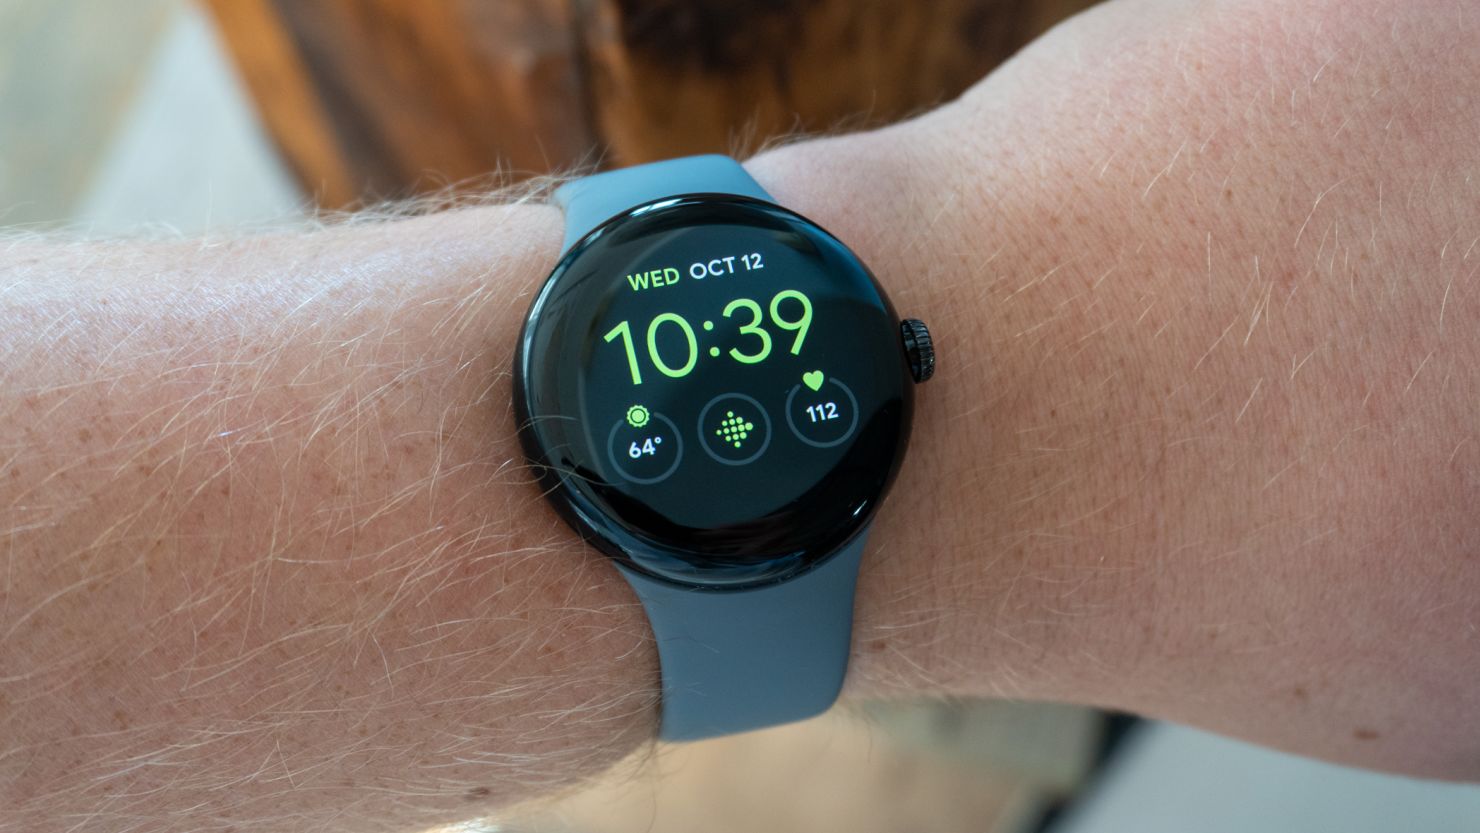 Who else has been using Samsung Health? I think it's pretty neat